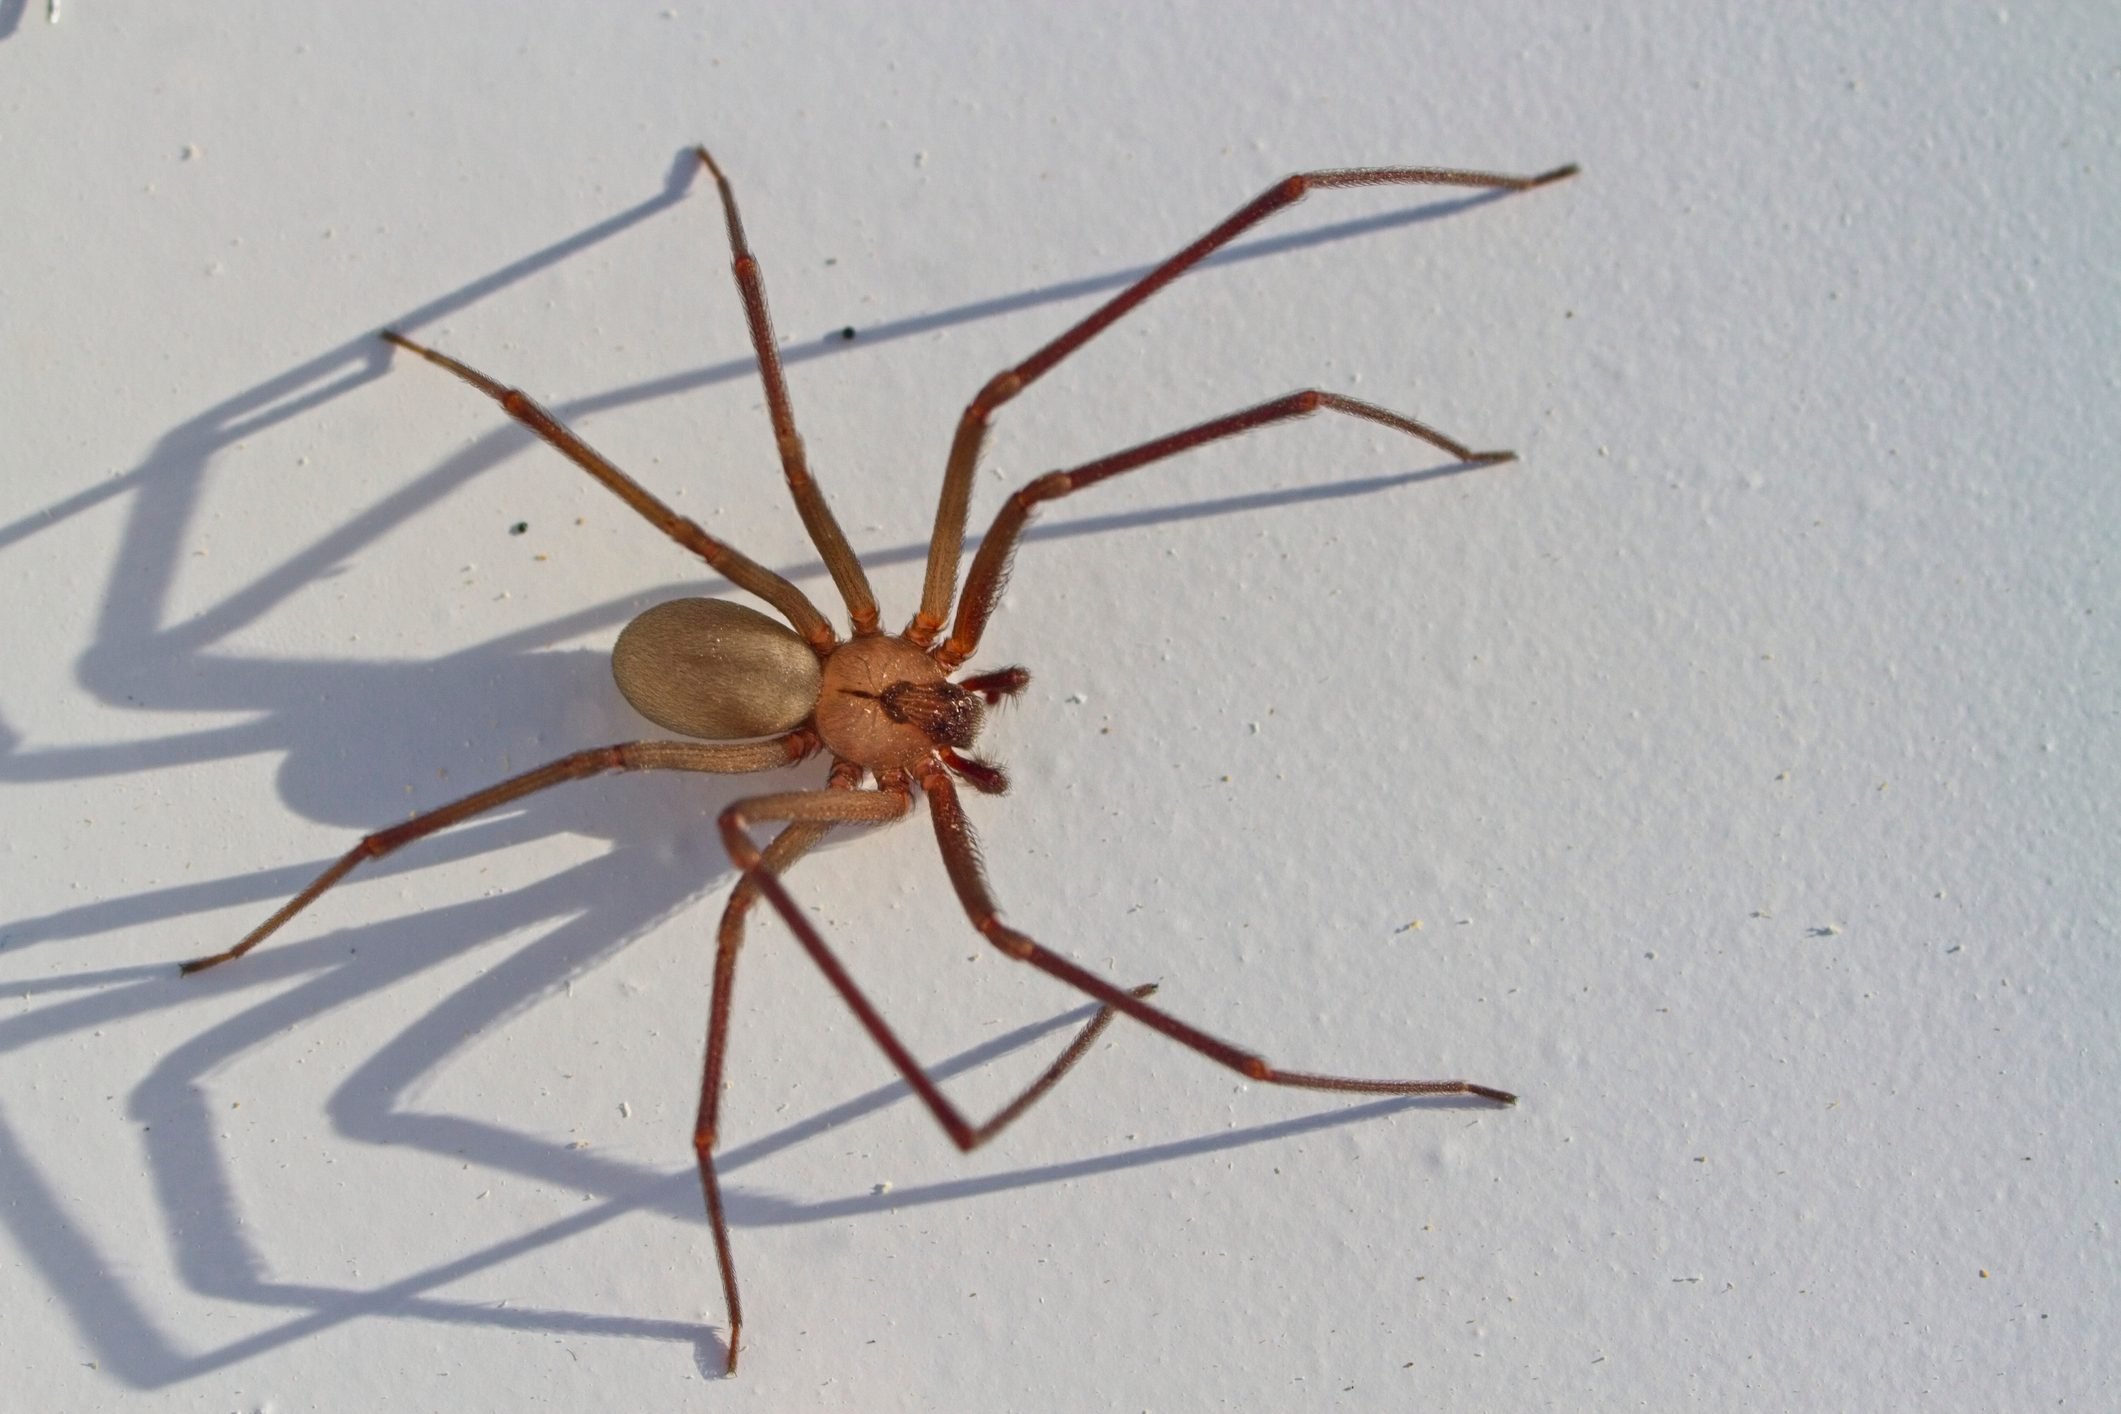 What Do Brown Recluse Spiders Eat?